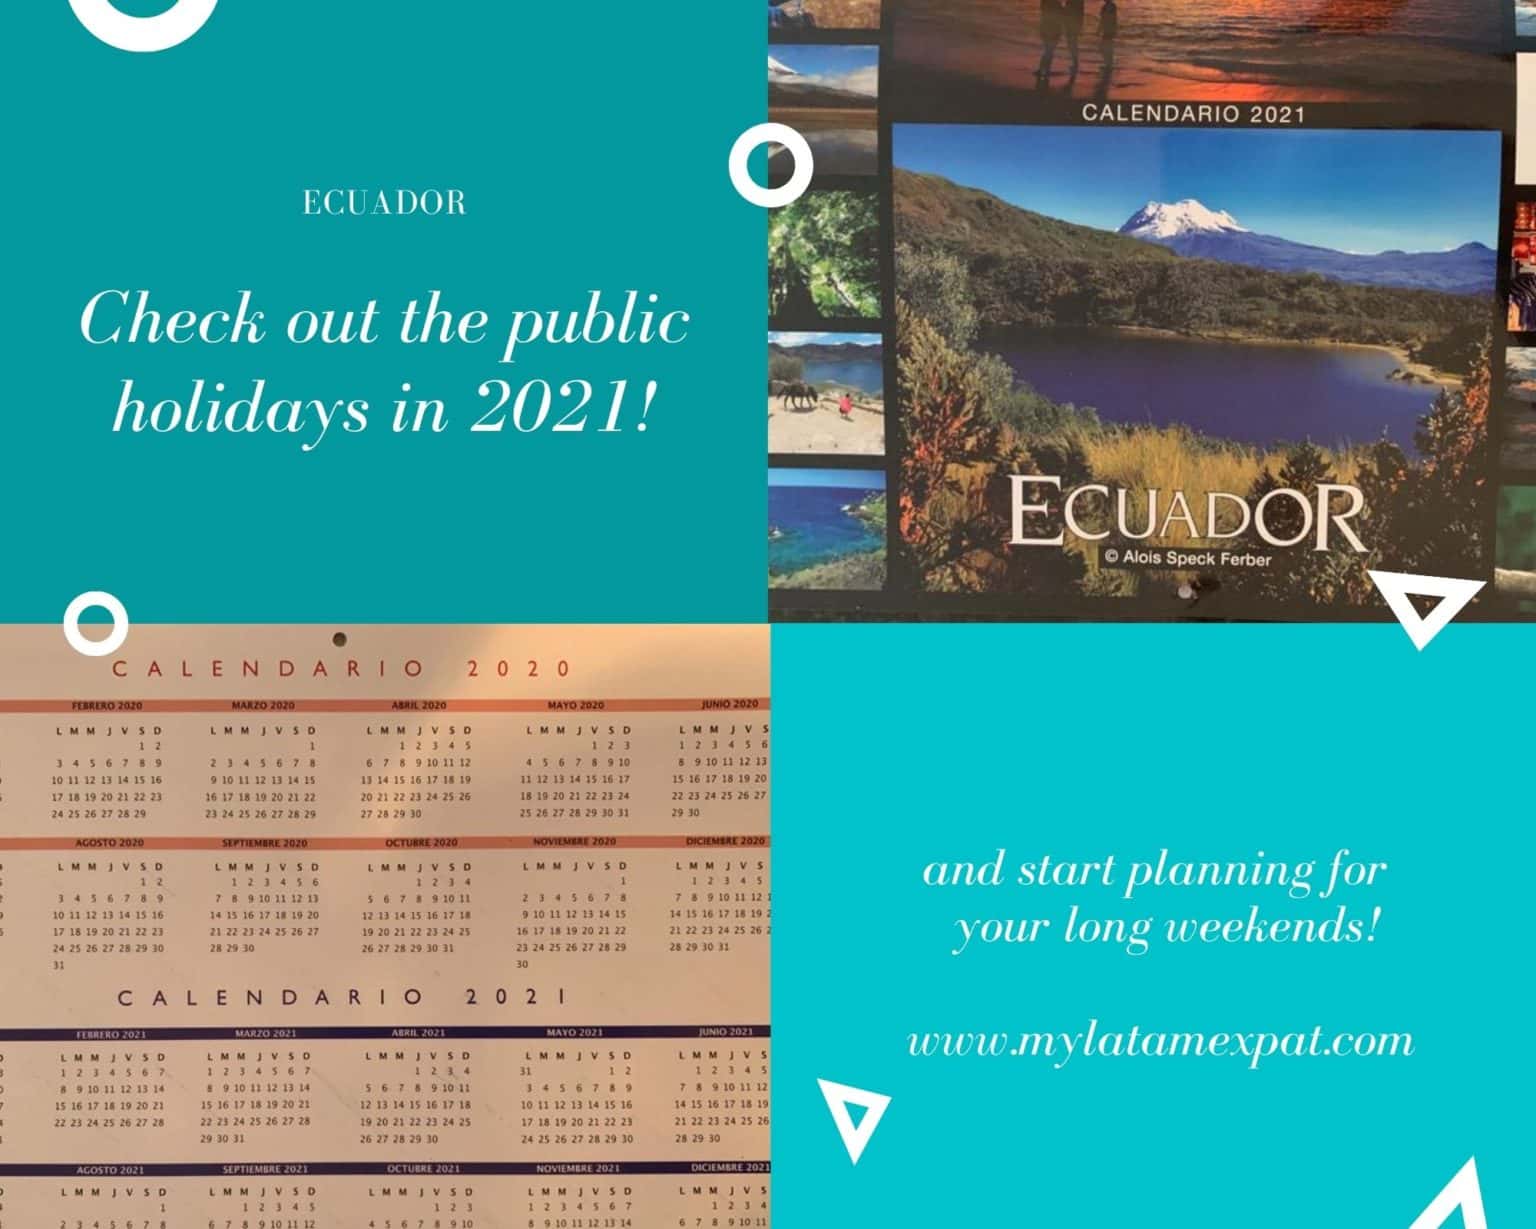 Check out public holidays in Ecuador for 2021 ! My Latam Expat